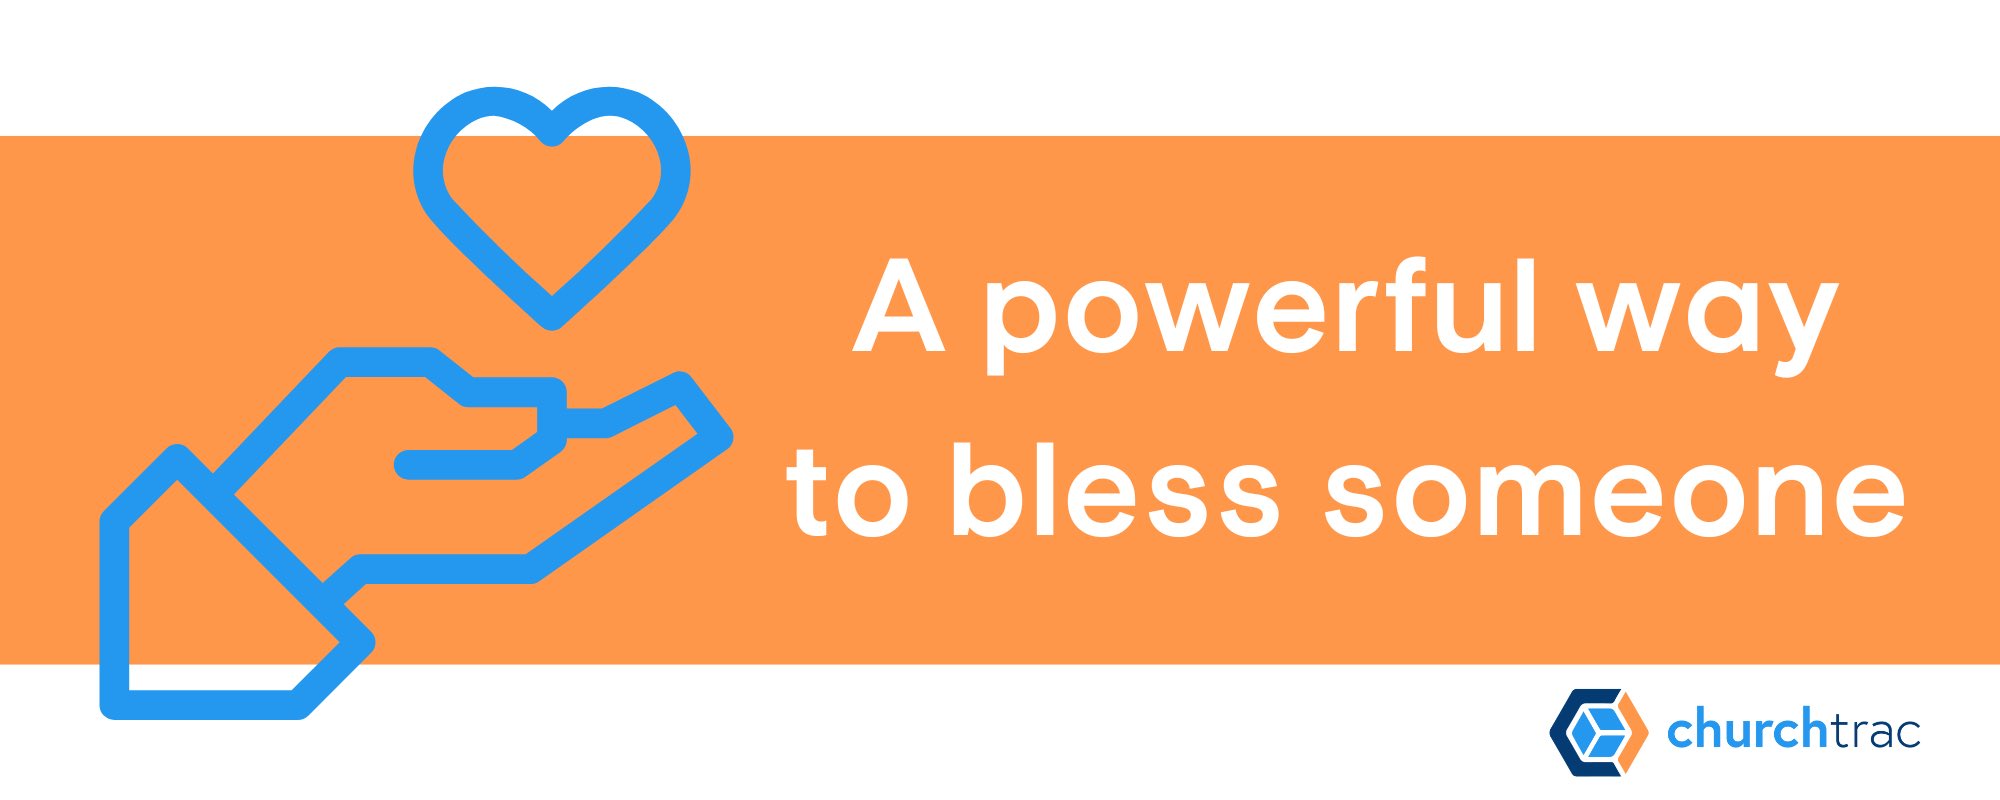 Benevolence Fund is used as a powerful way to bless someone